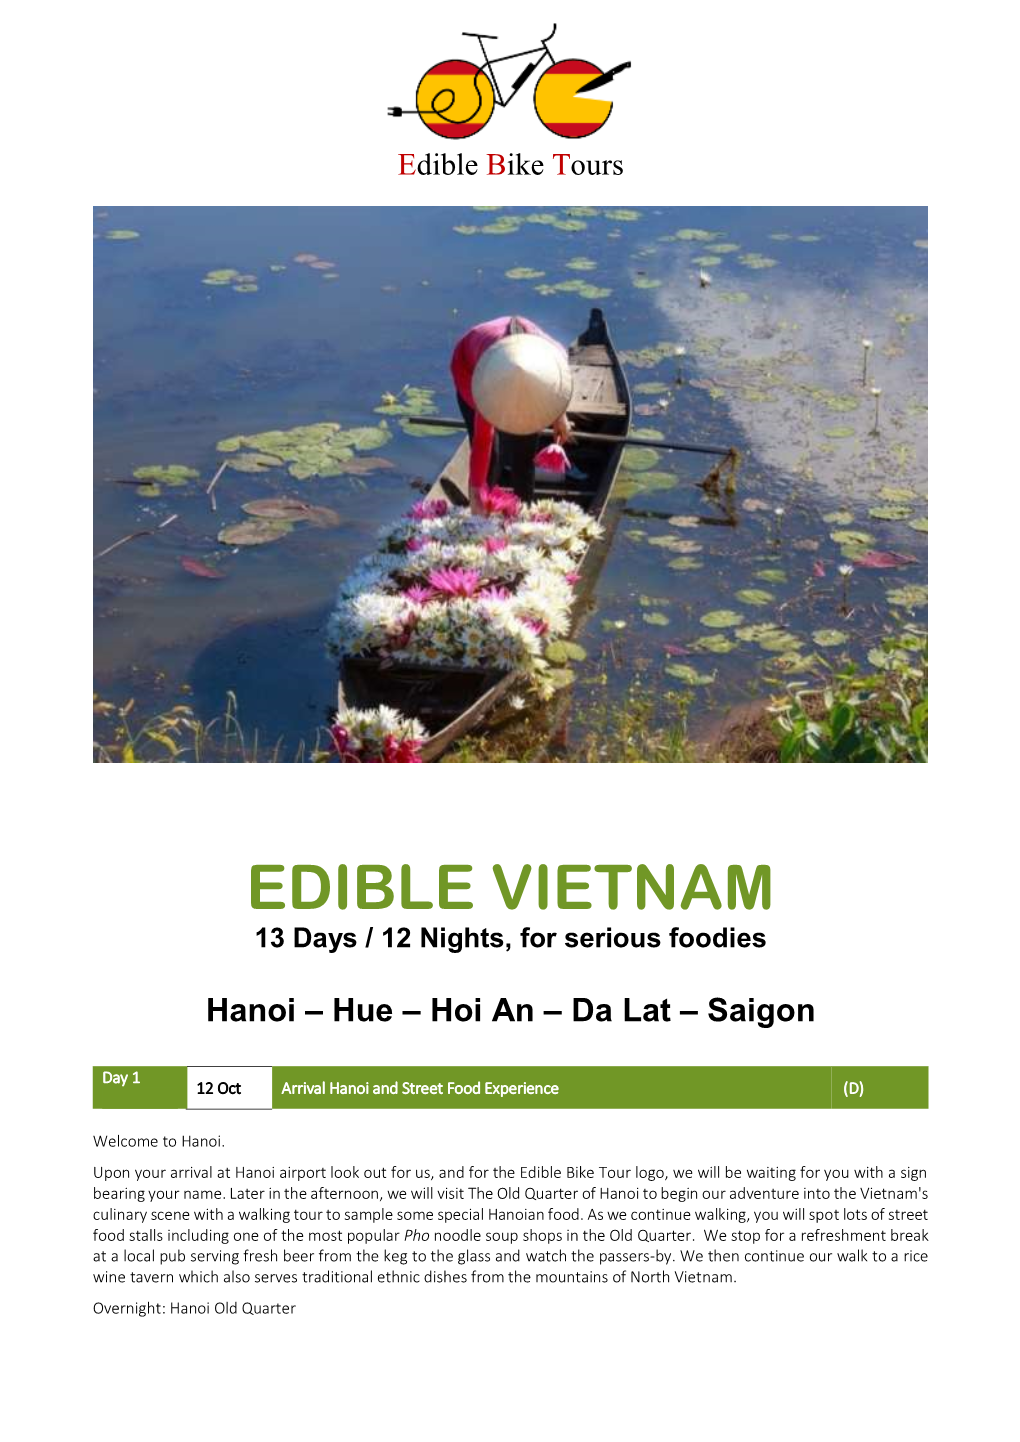 EDIBLE VIETNAM 13 Days / 12 Nights, for Serious Foodies